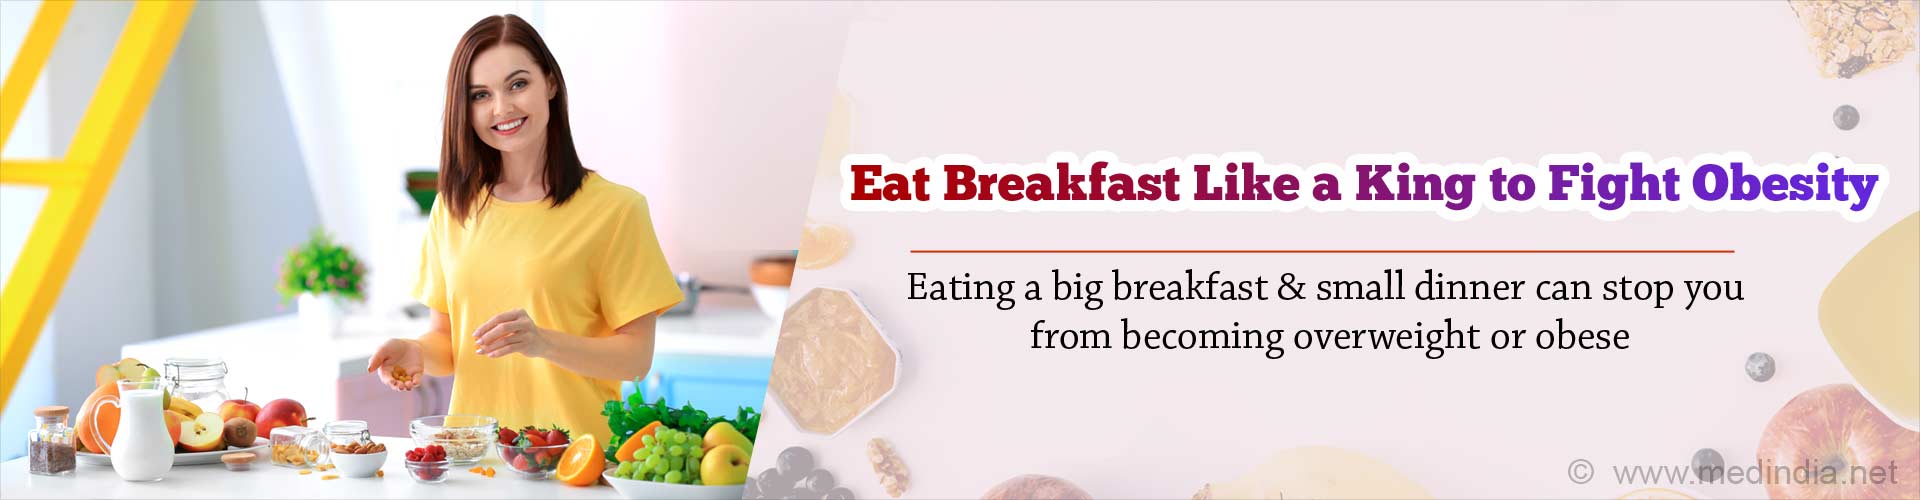 Eat breakfast like a king to fight obesity. Eating a big breakfast & small dinner can stop you from becoming overweight or obese.